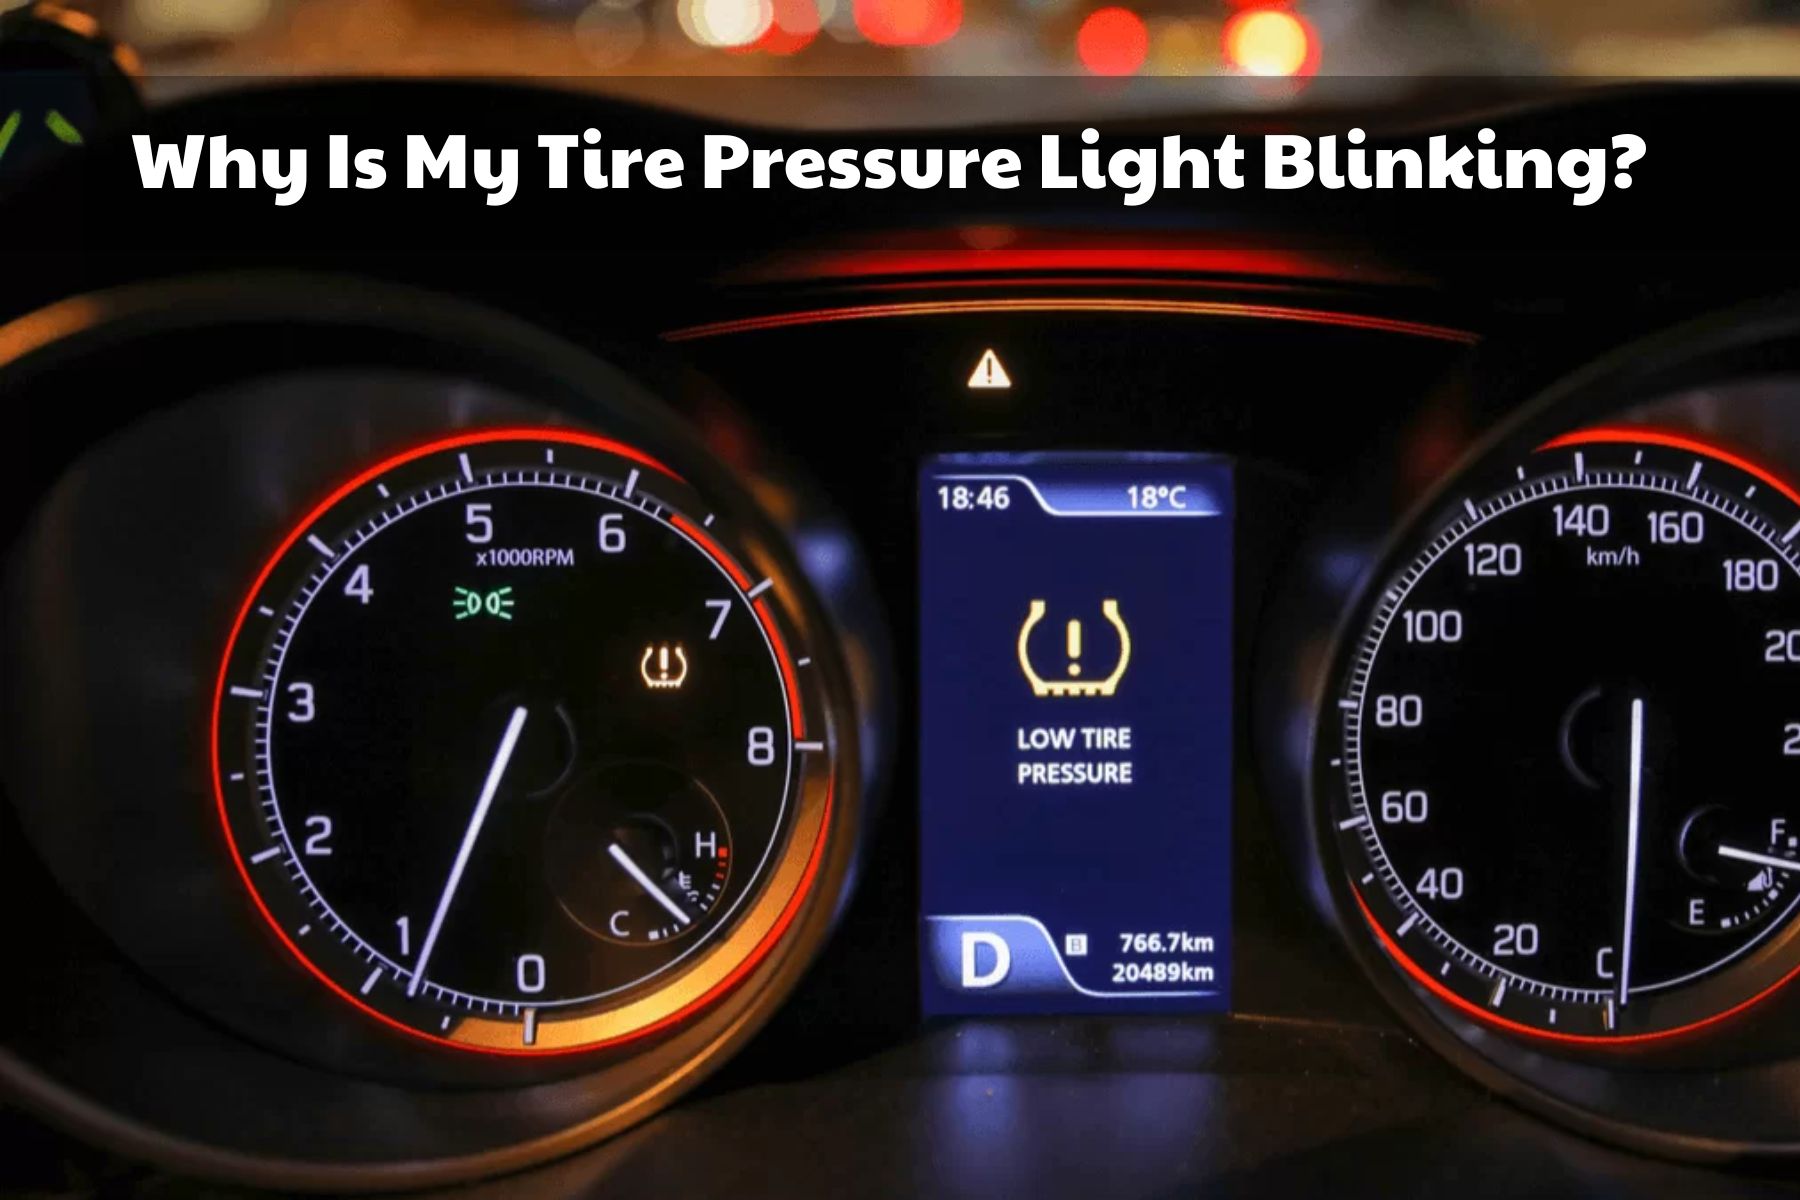 Why Is My Tire Pressure Light Blinking